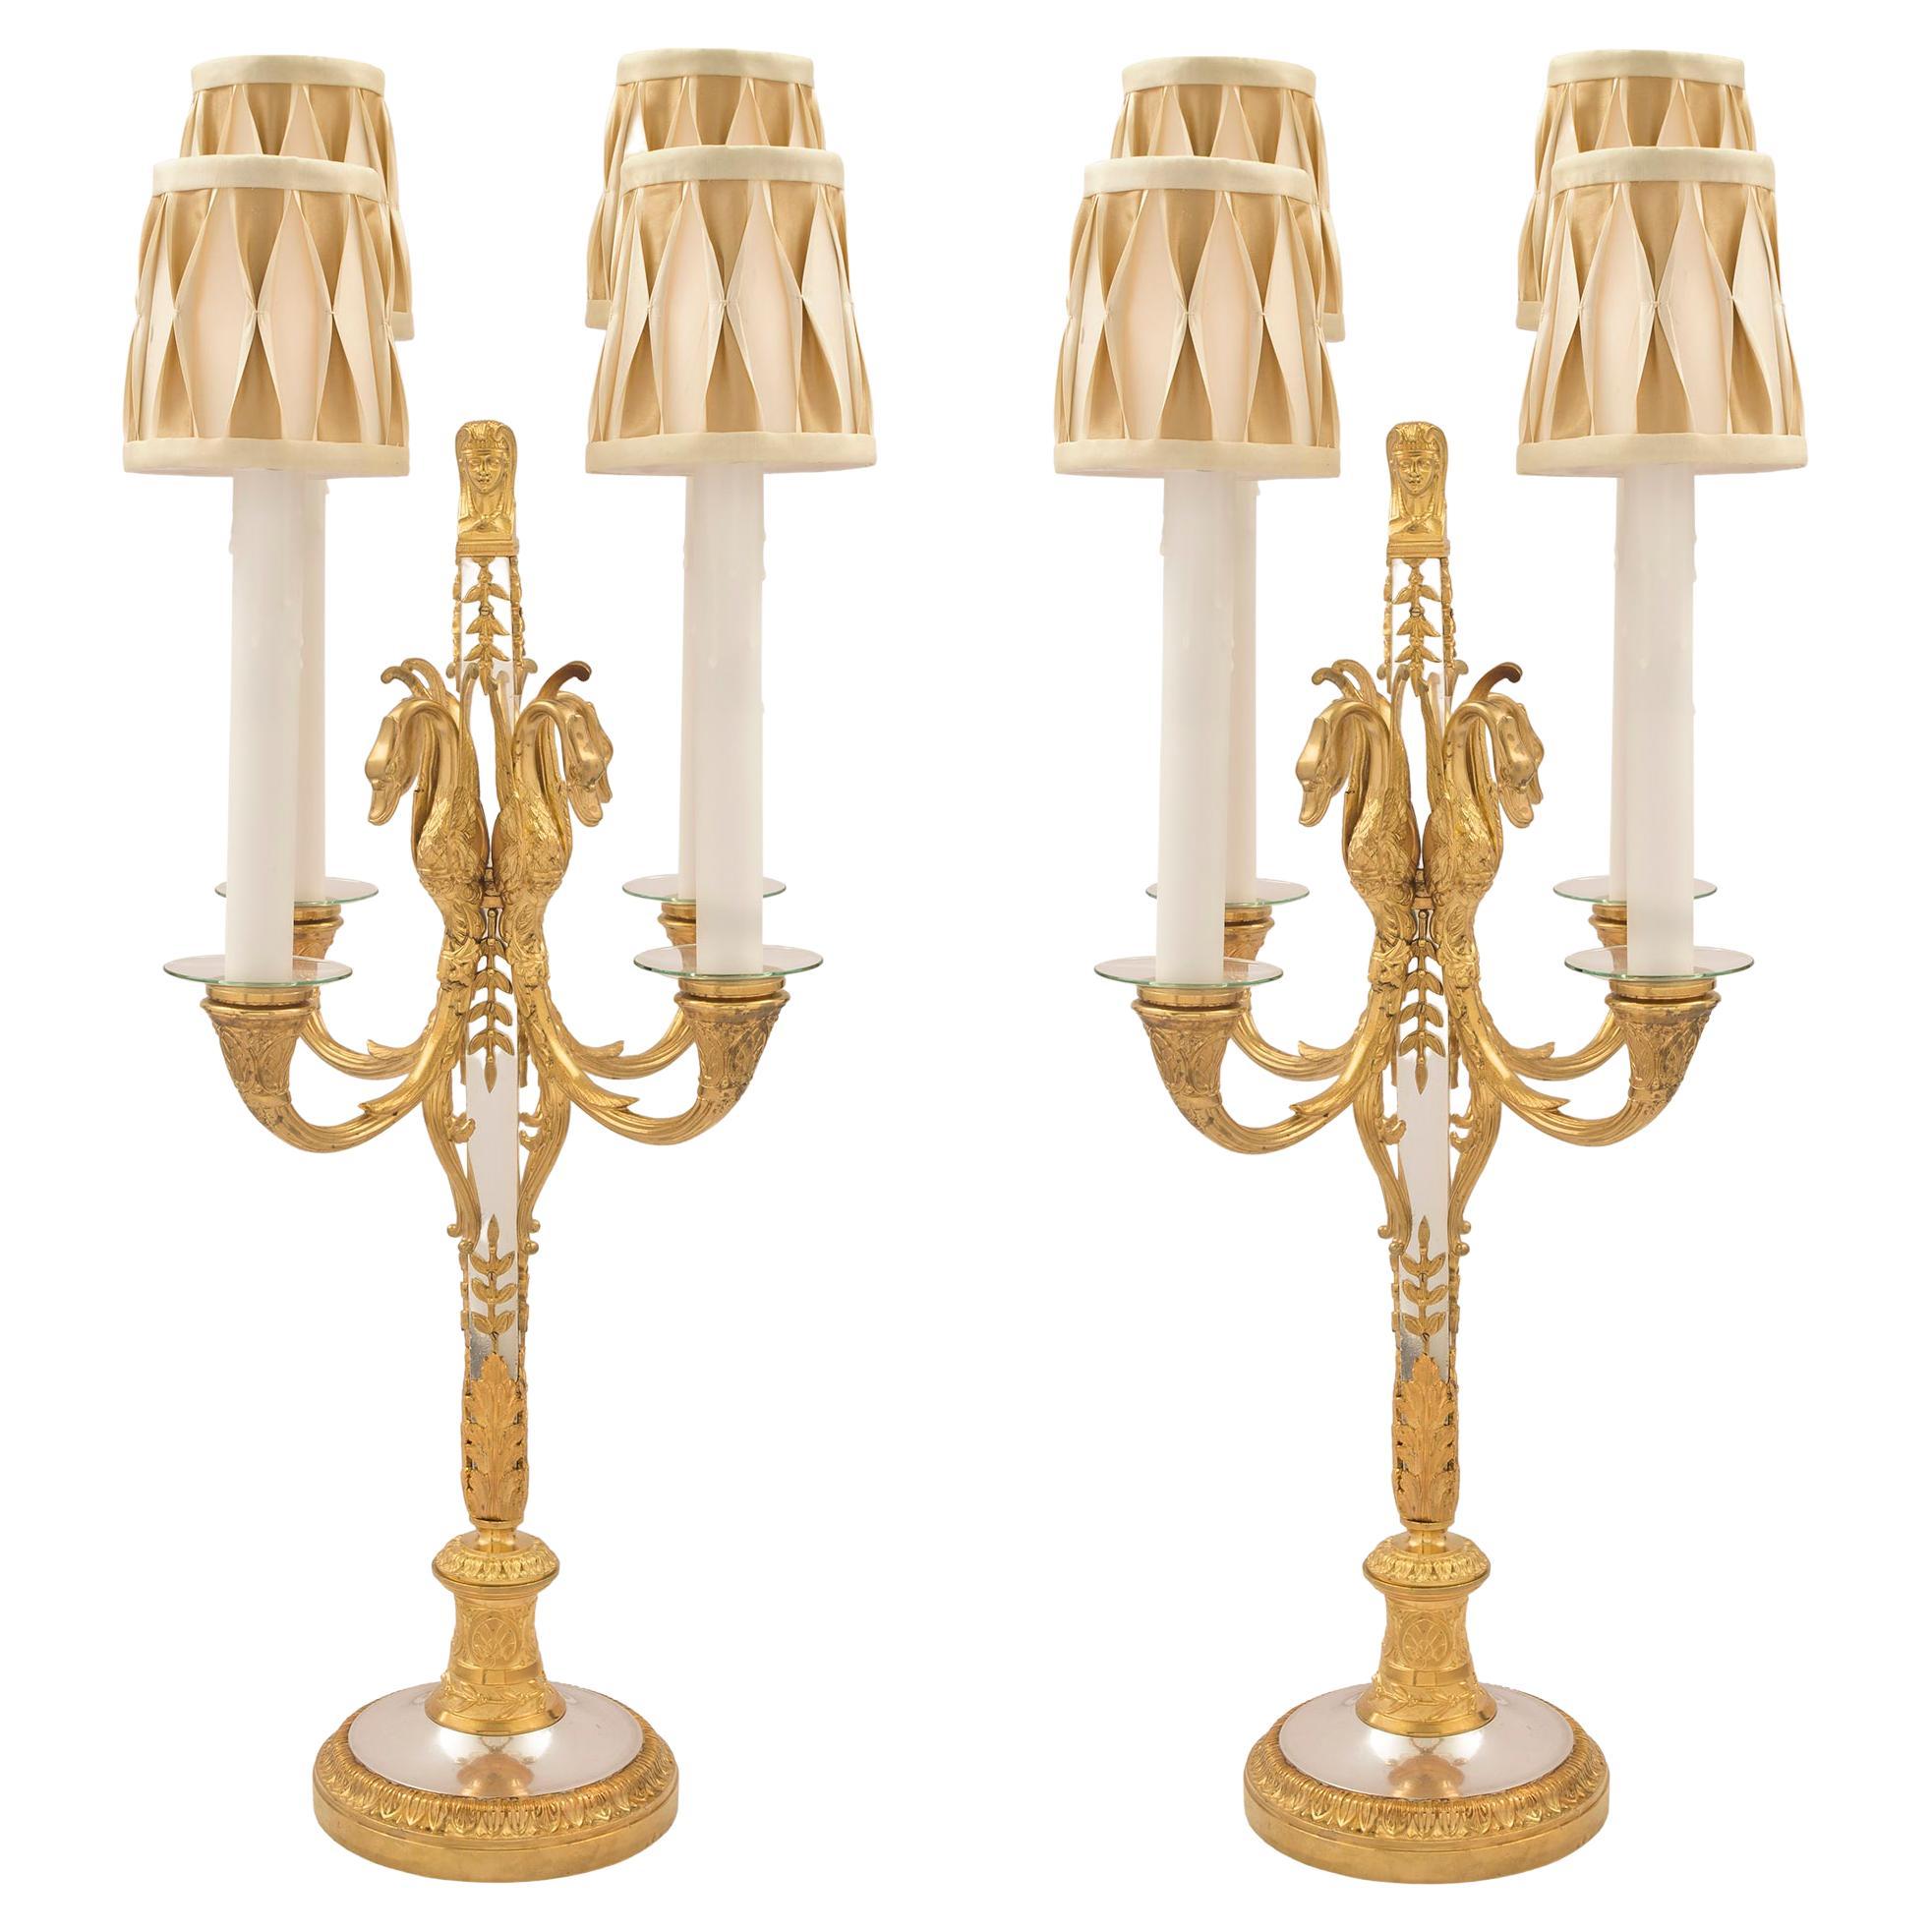 Pair of French Mid 19th Century Neo-Classical St. Candelabra Lamps